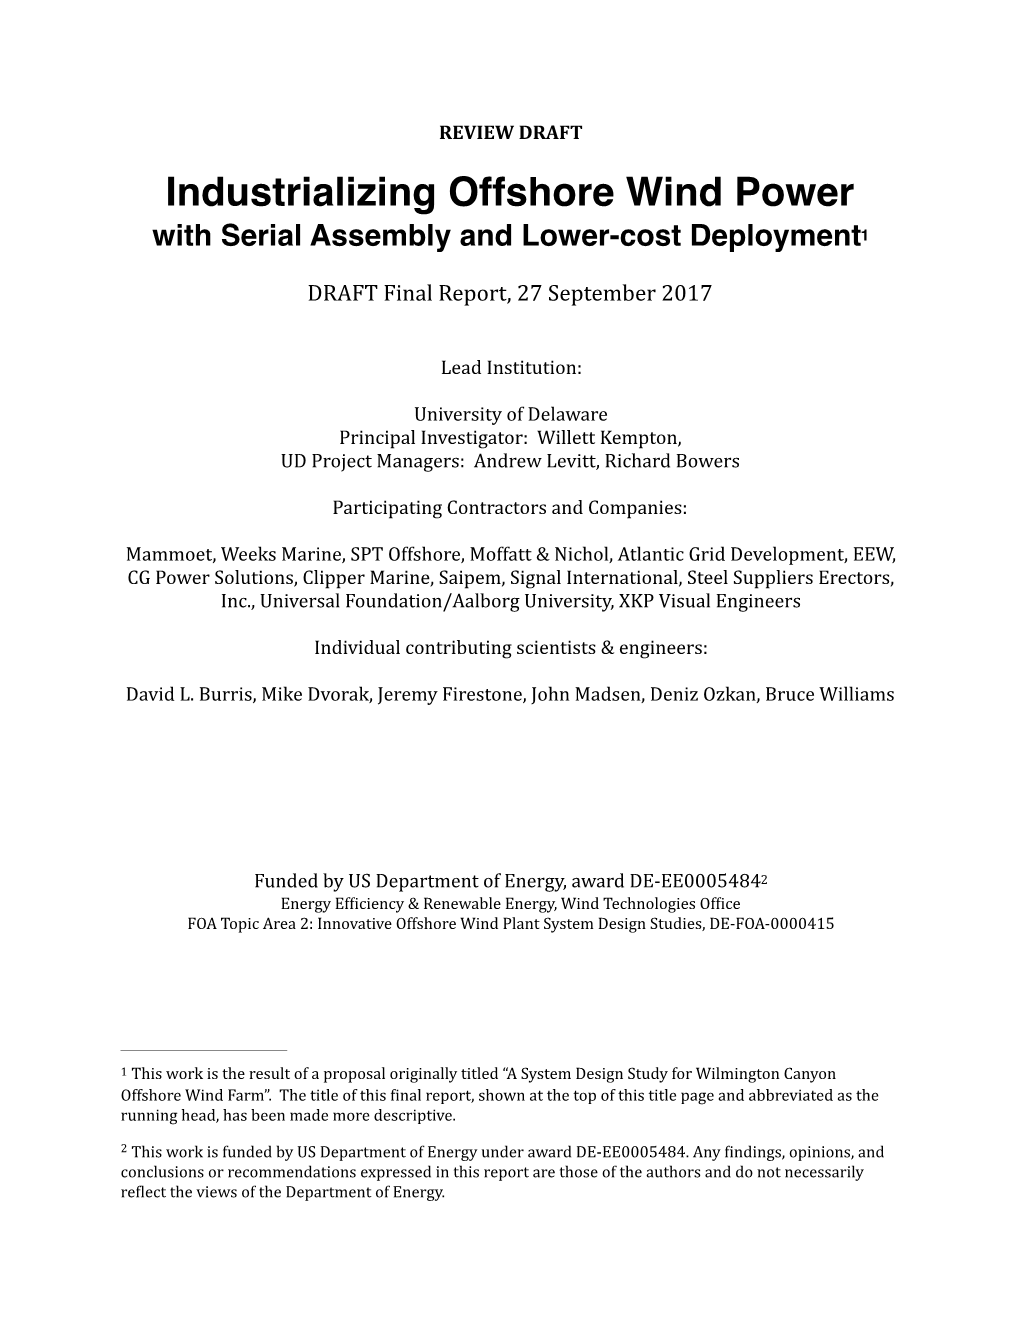 Industrializing Offshore Wind Power-DRAFT-27Sep2017.Pages